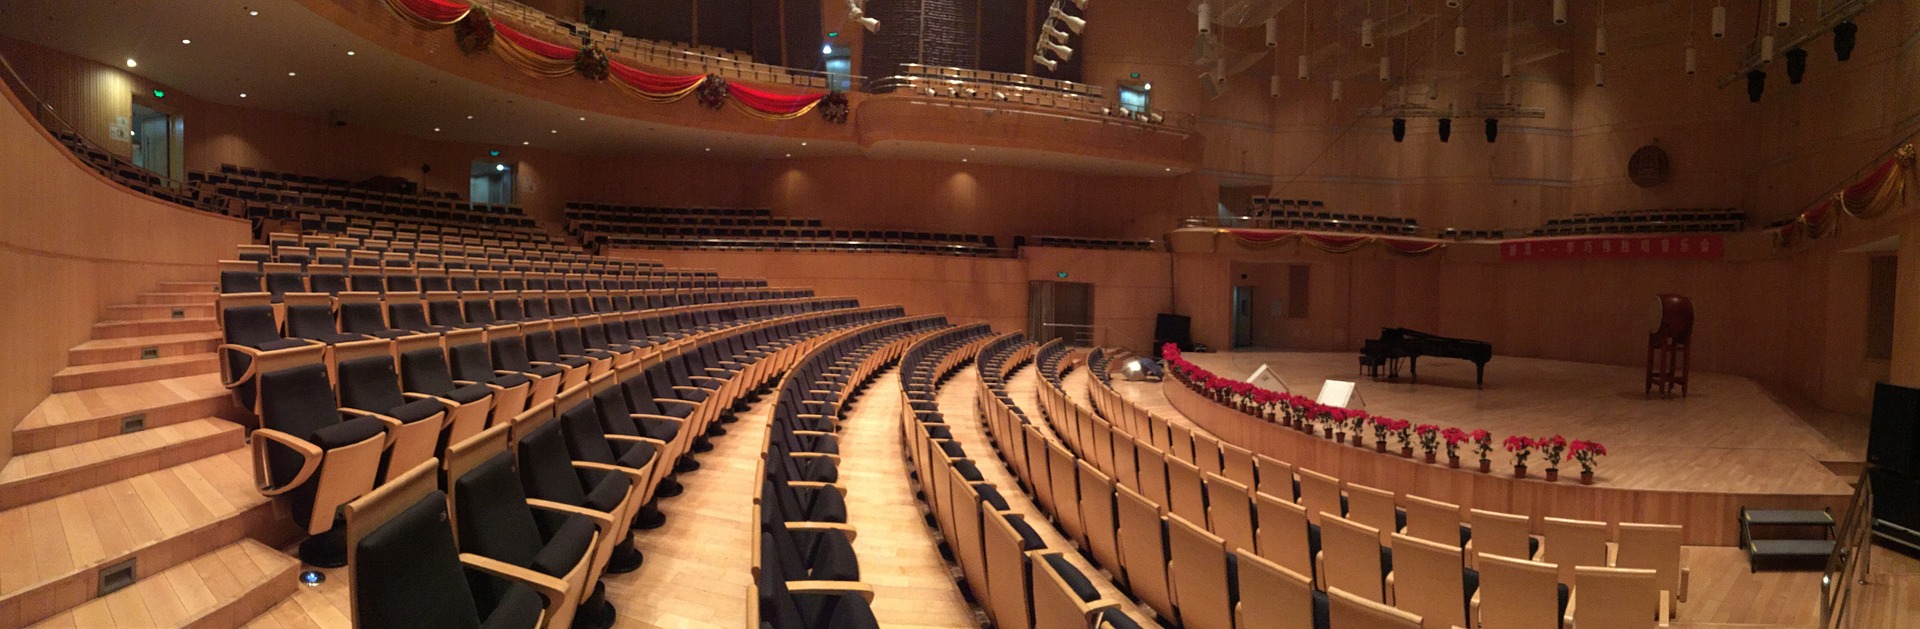 piano conference concert hall